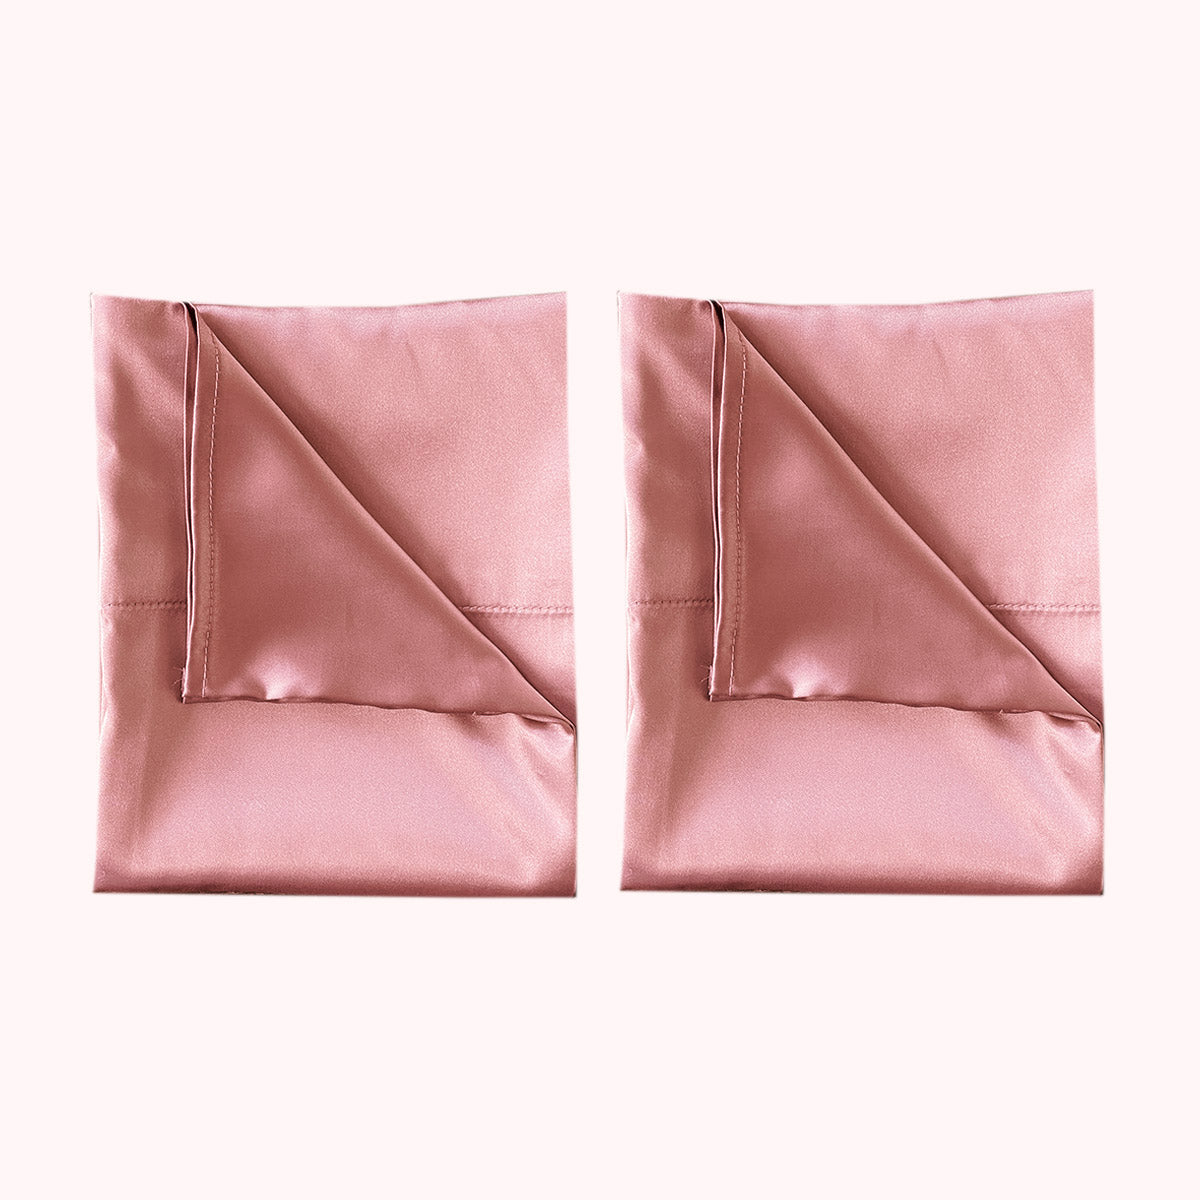 2 folded satin pillowcases in pink